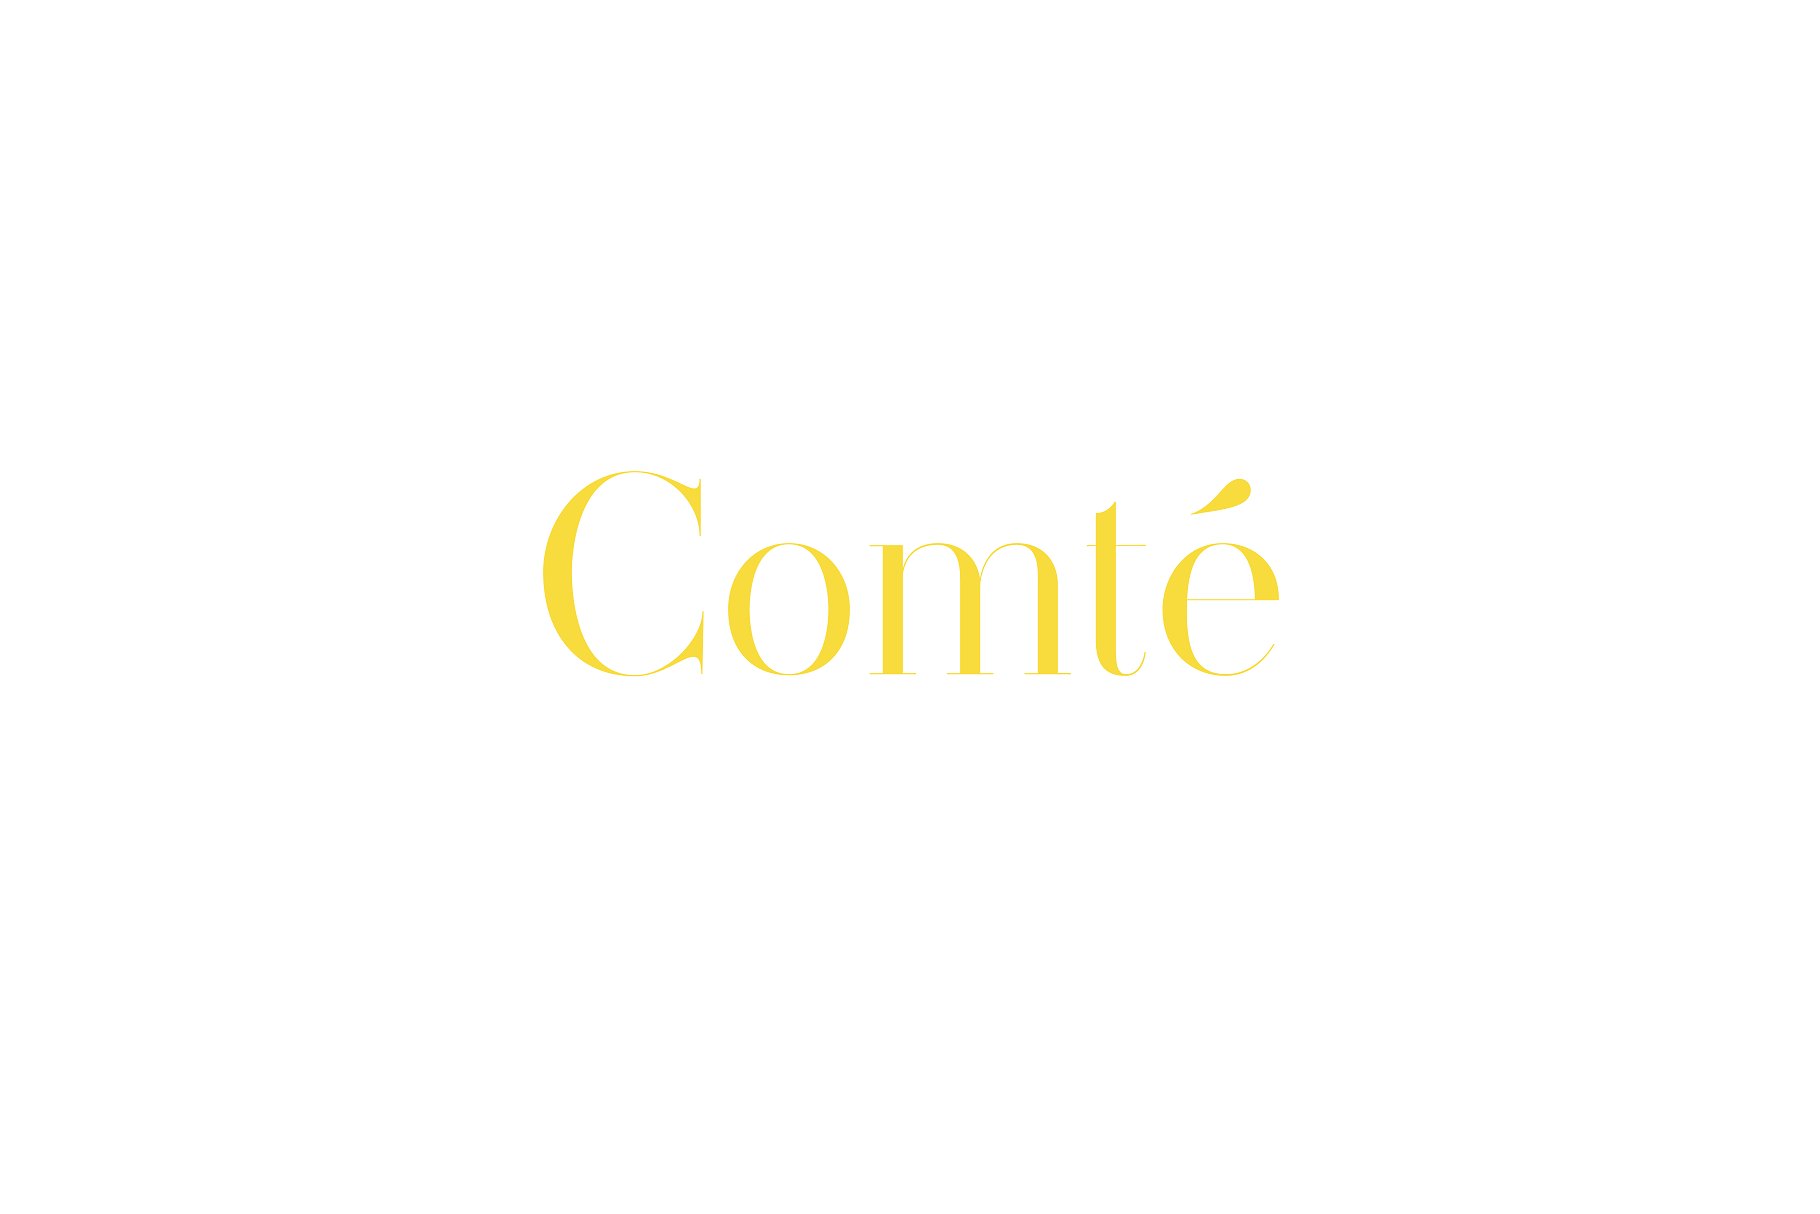 Comte a clean typeface for minimalist logos